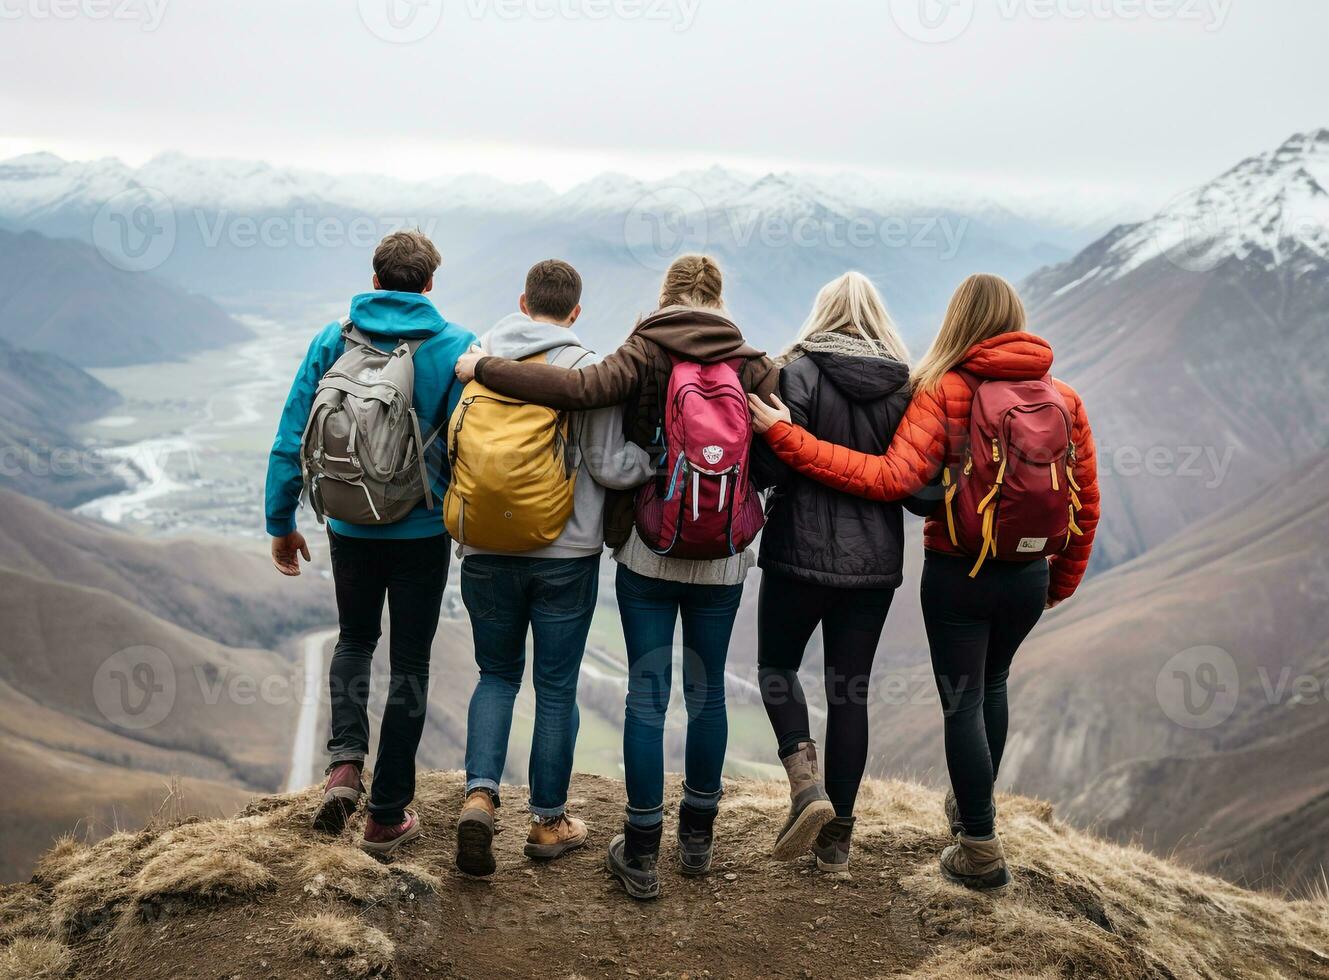 A group of friends hiking together in the mountains, mental health images, photorealistic illustration photo